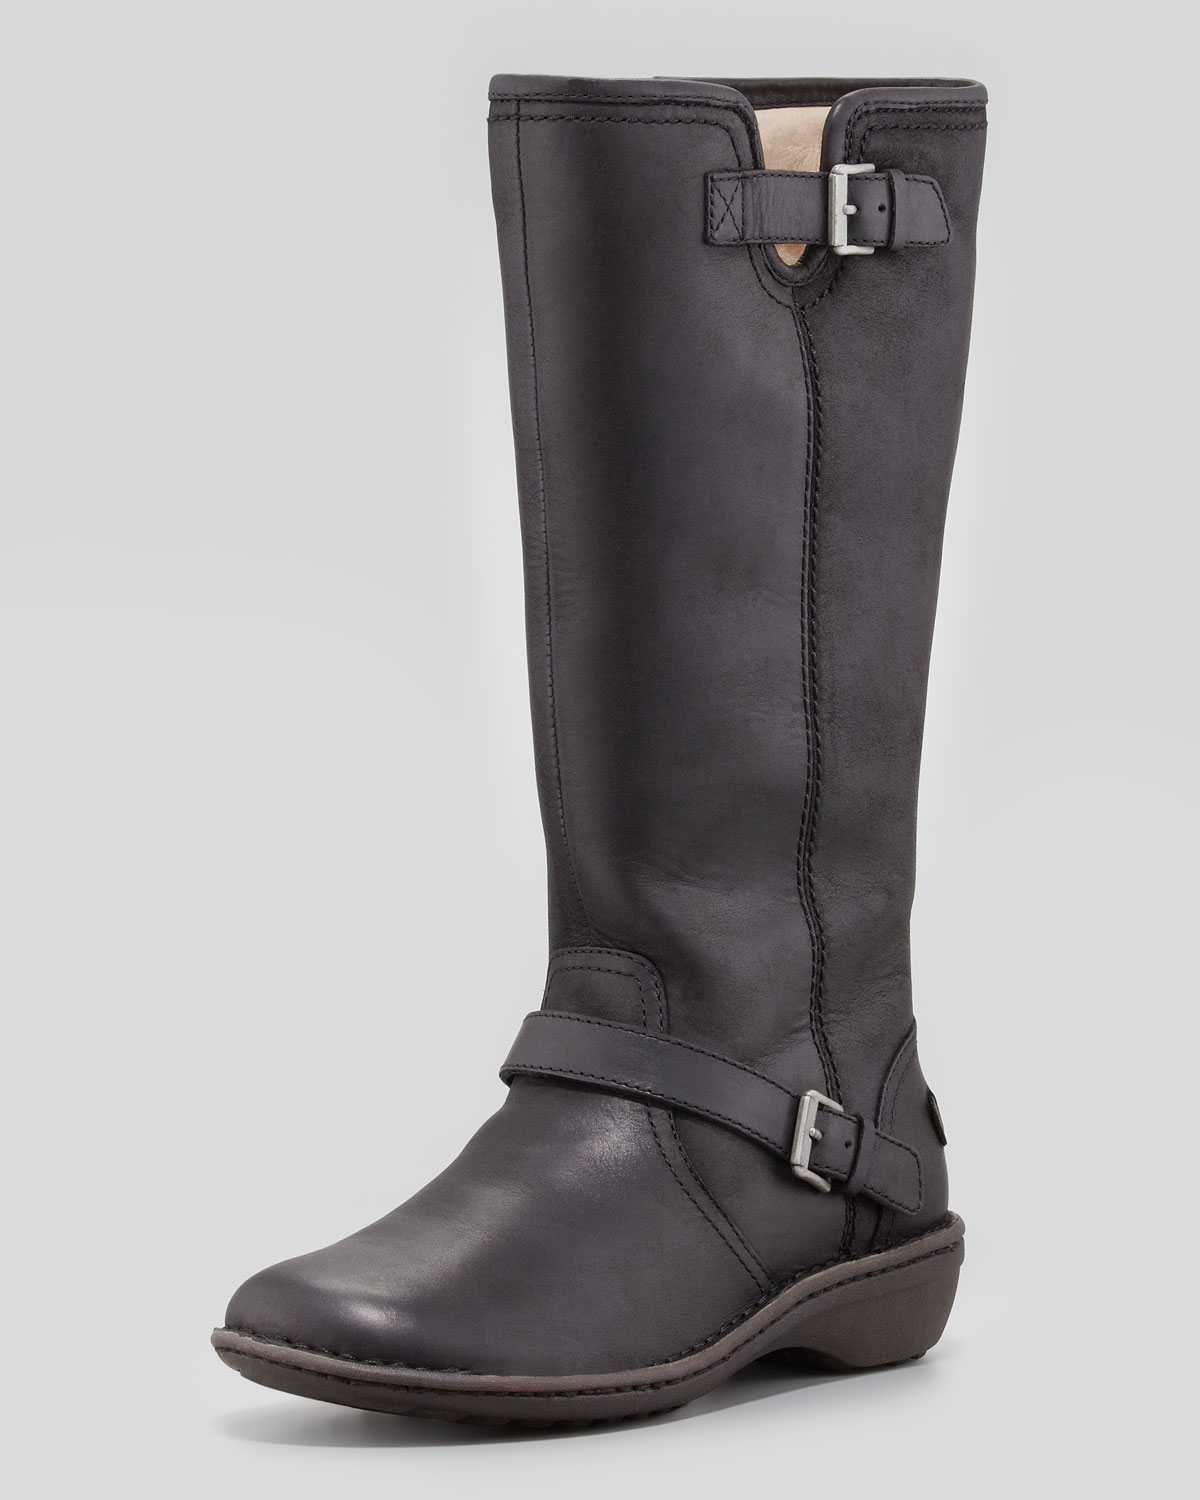 Ugg Tupelo Tall Leather Boot Black in Black | Lyst